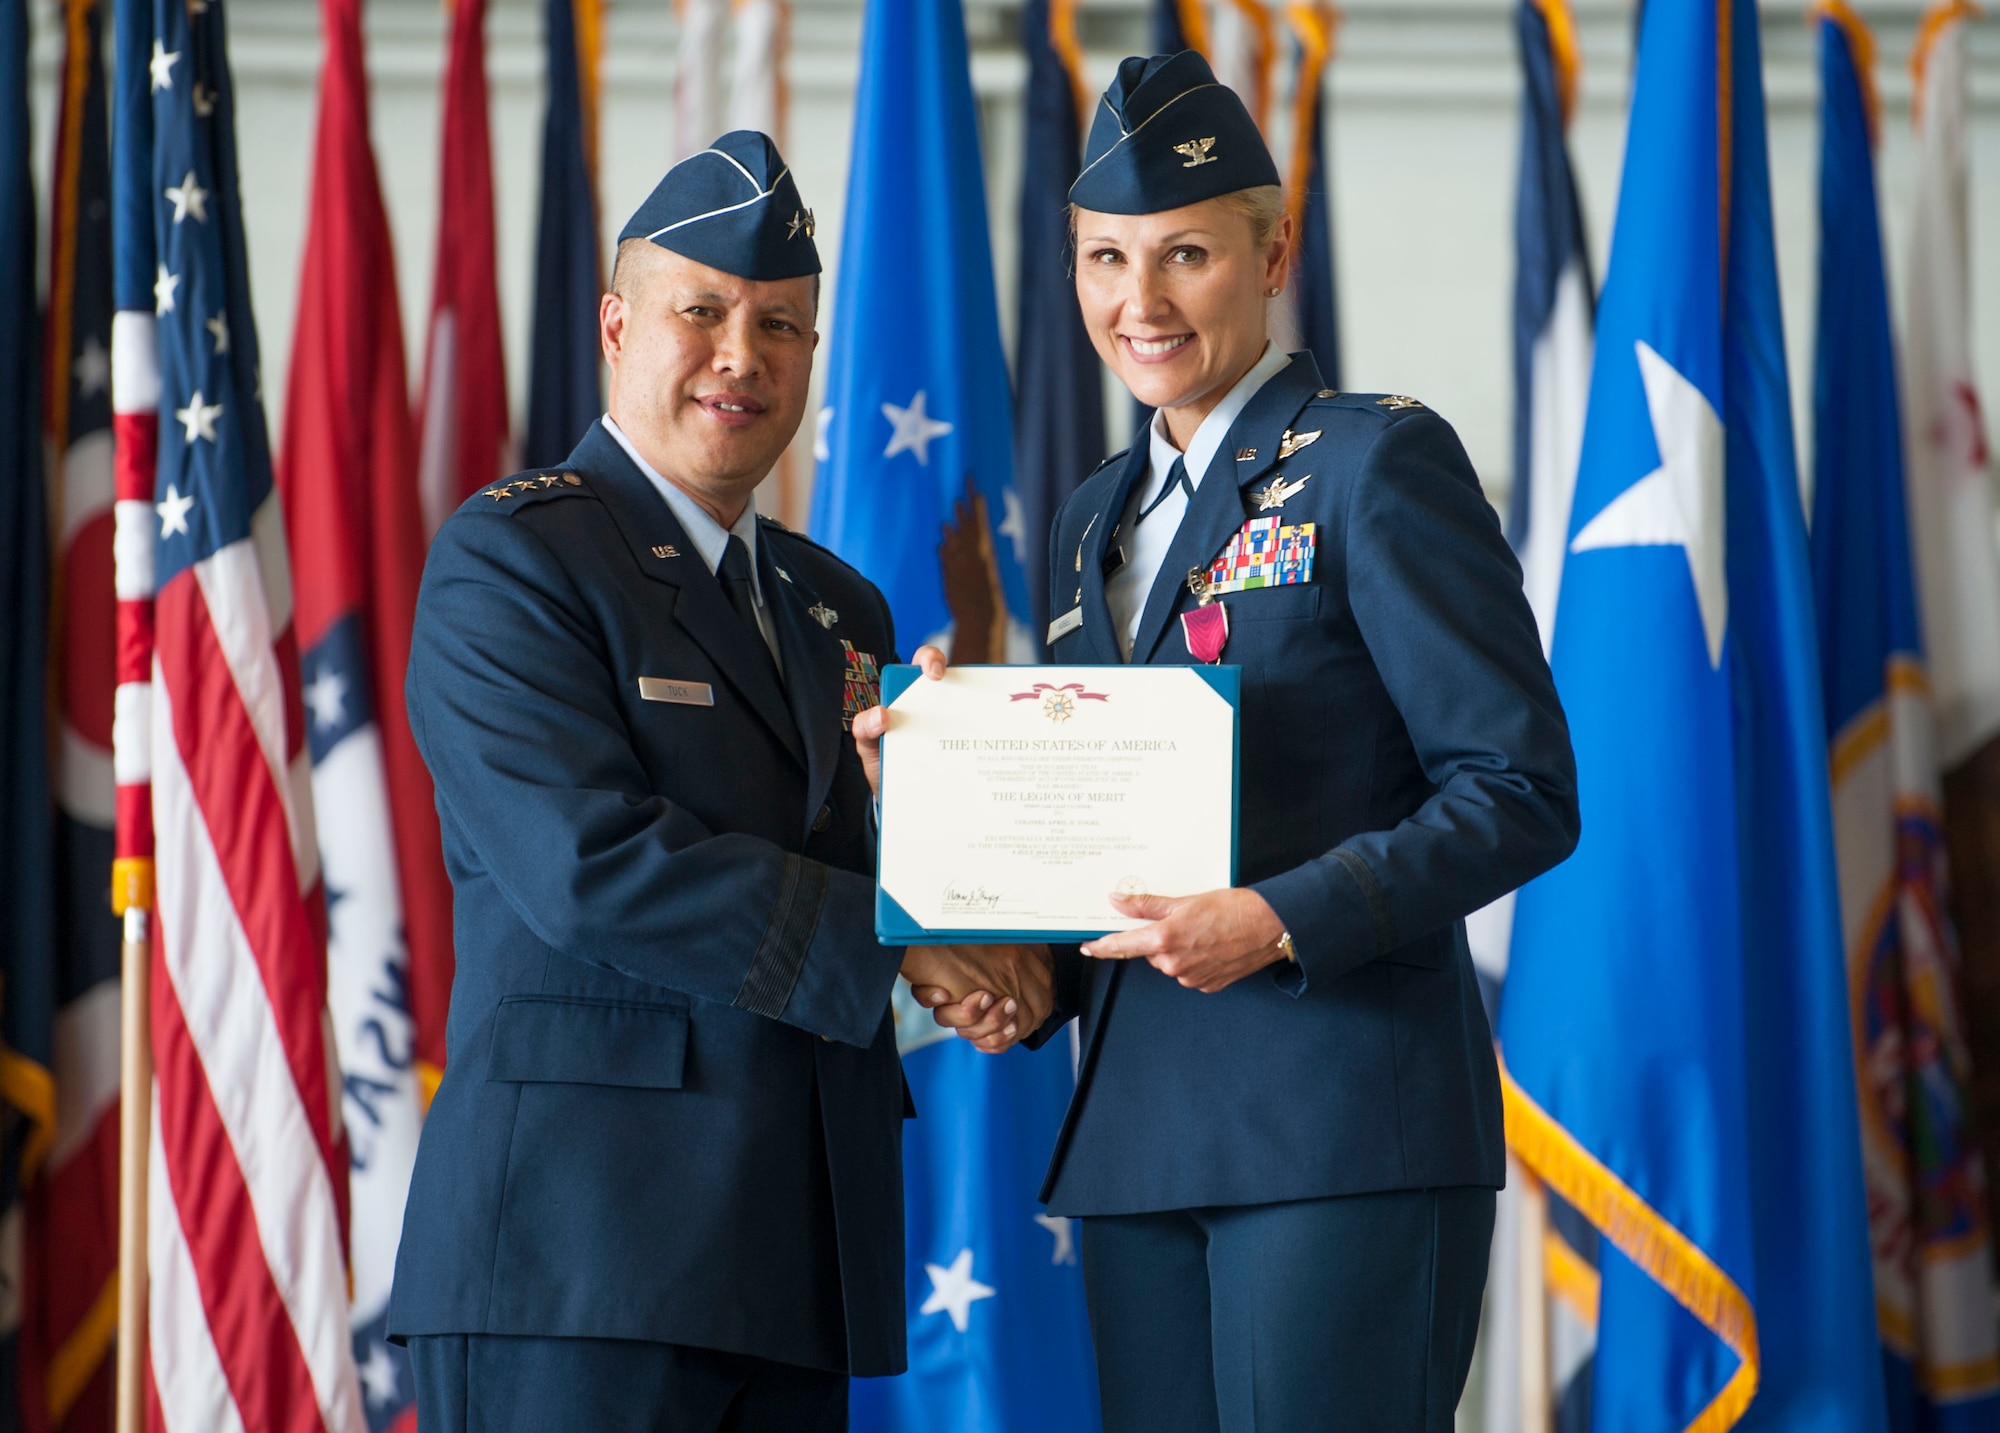 U.S. Air Force Lt. Gen. GI Tuck, 18th Air Force commander, presents a Legion of Merit to Col. April Vogel, the 6th Air Mobility Wing commander before her change of command ceremony at MacDill Air Force Base, Fla., June 29, 2018.